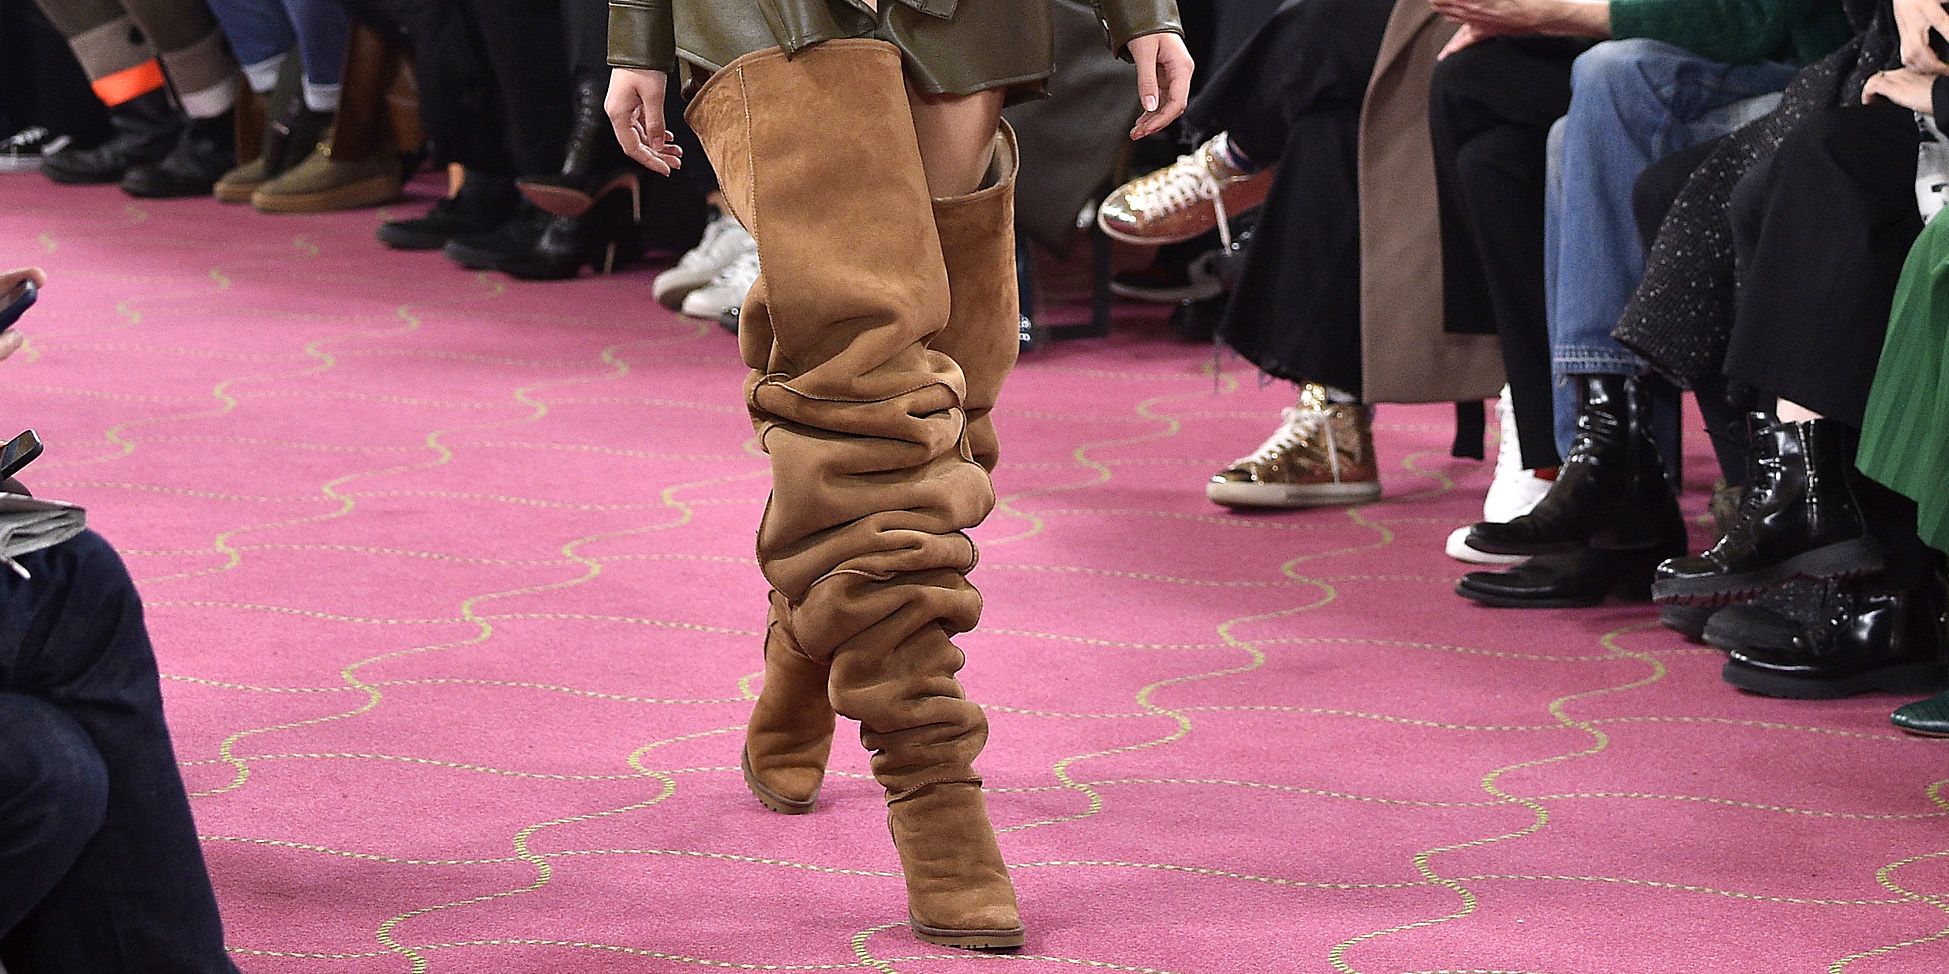 Thigh-High Ugg Boots Paris Fashion Week - Over-the-Knee Ugg Boots